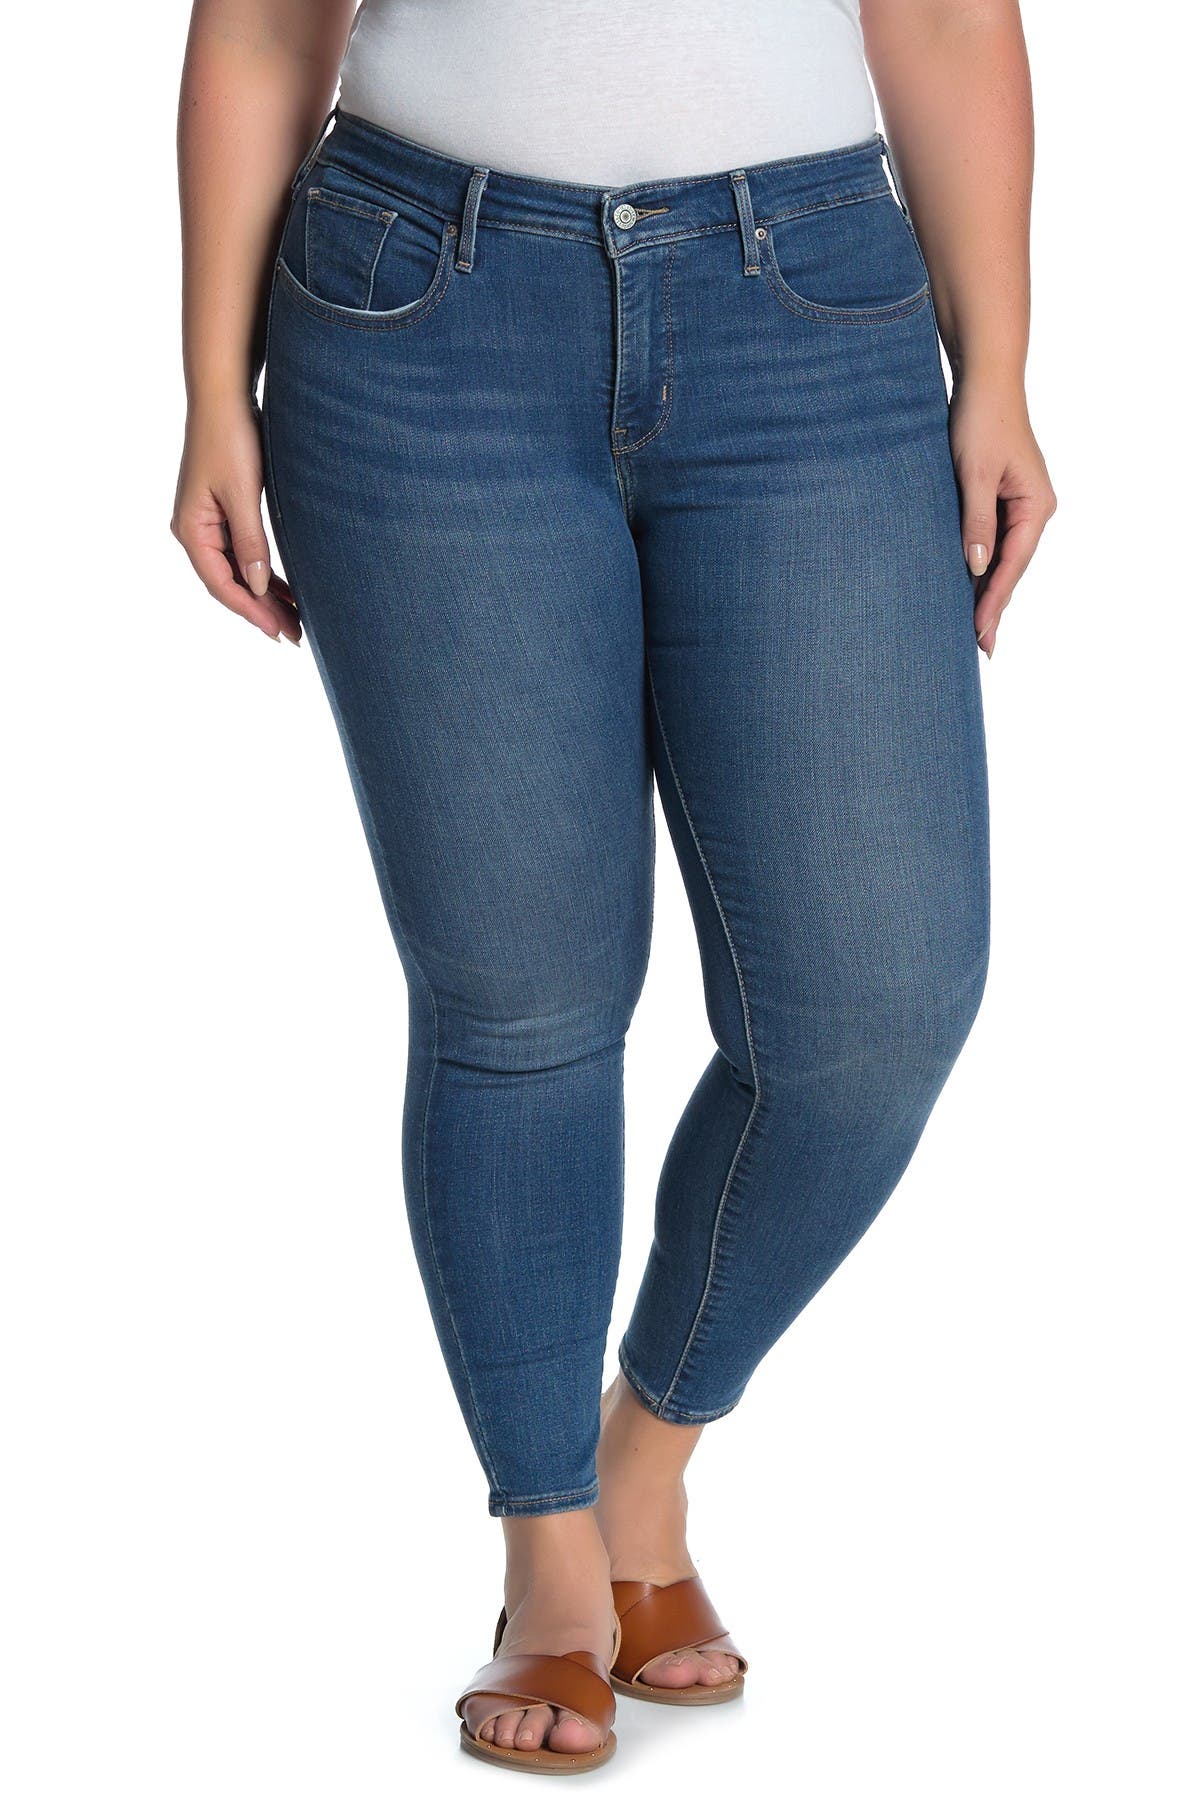 levi's 310 shaping super skinny jeans review